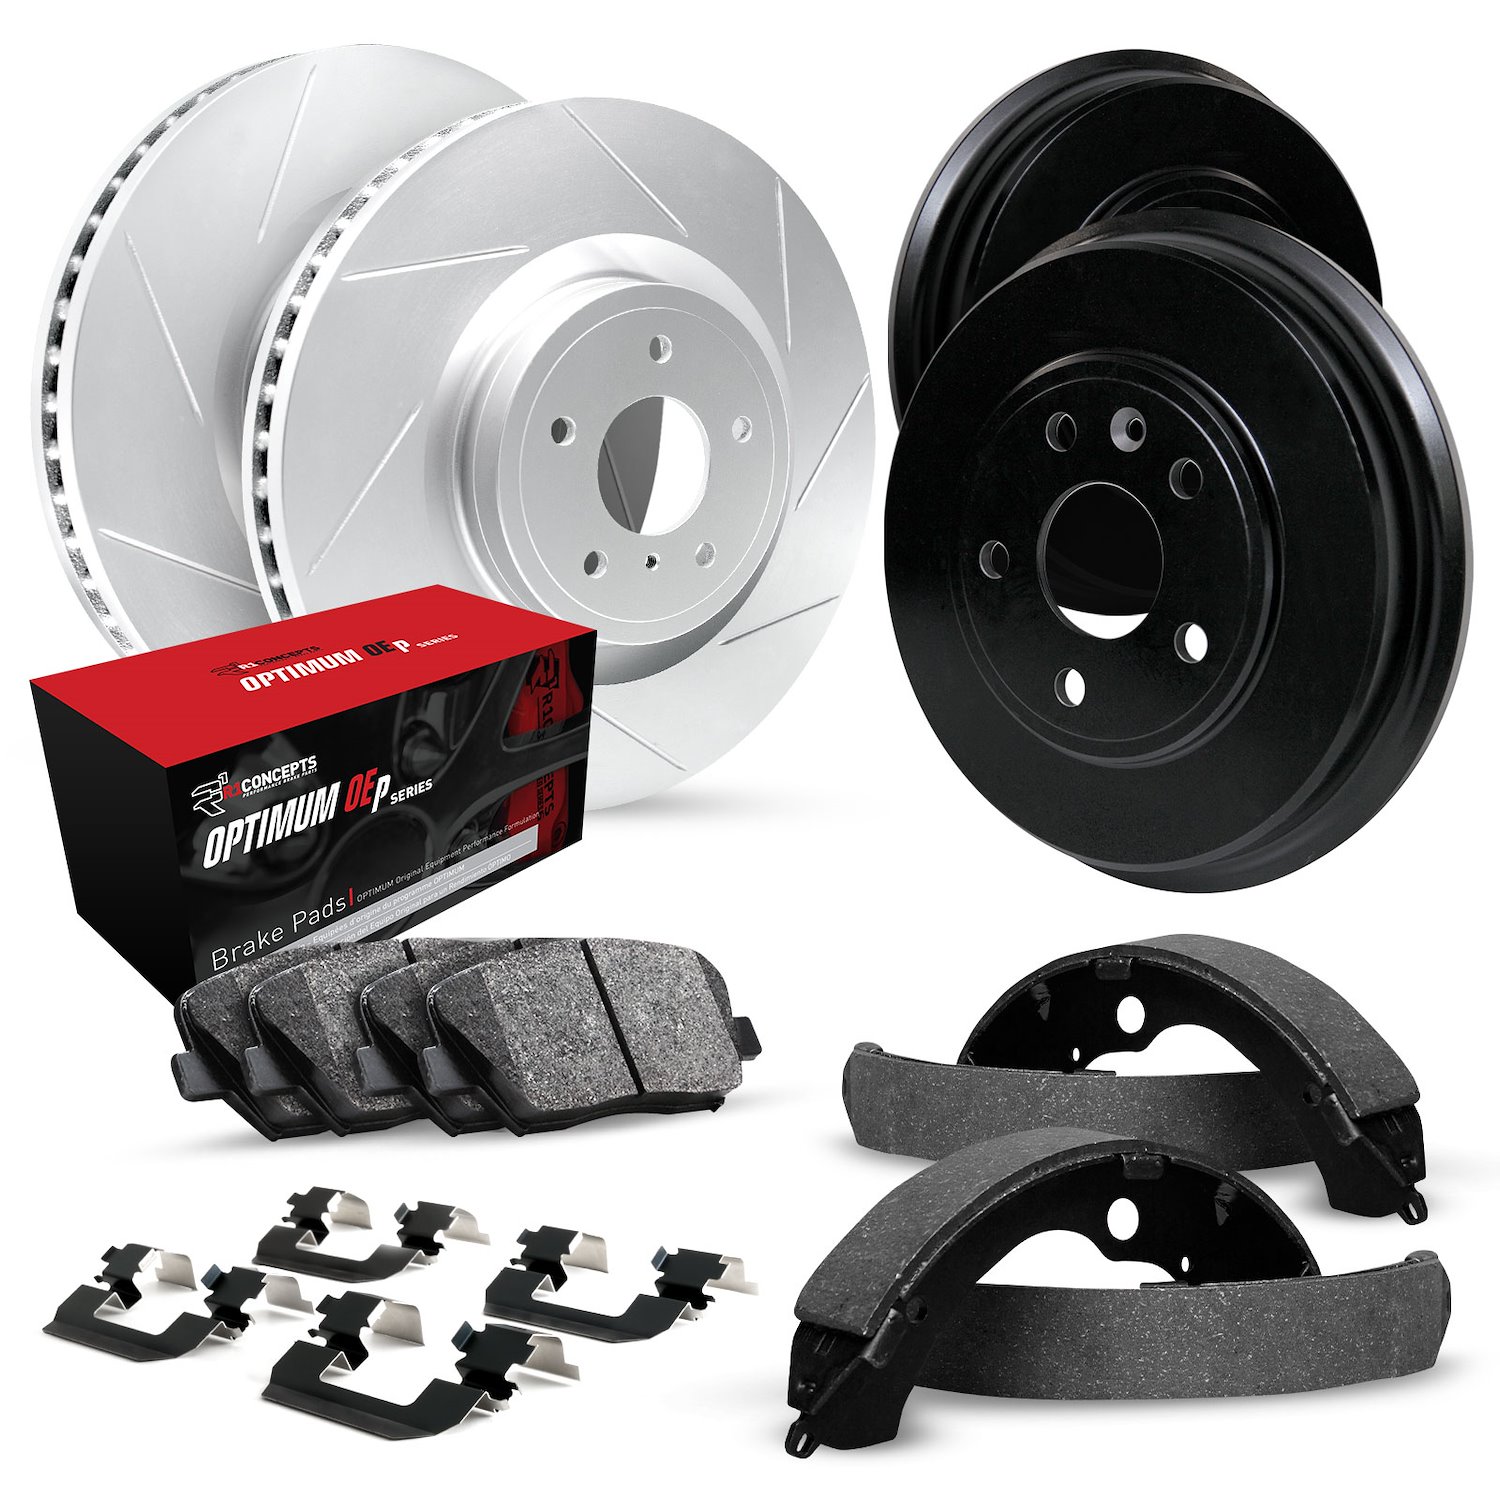 GEO-Carbon Slotted Brake Rotor & Drum Set w/Optimum OE Pads, Shoes, & Hardware, 1990-1991 Acura/Honda, Position: Front & Rear